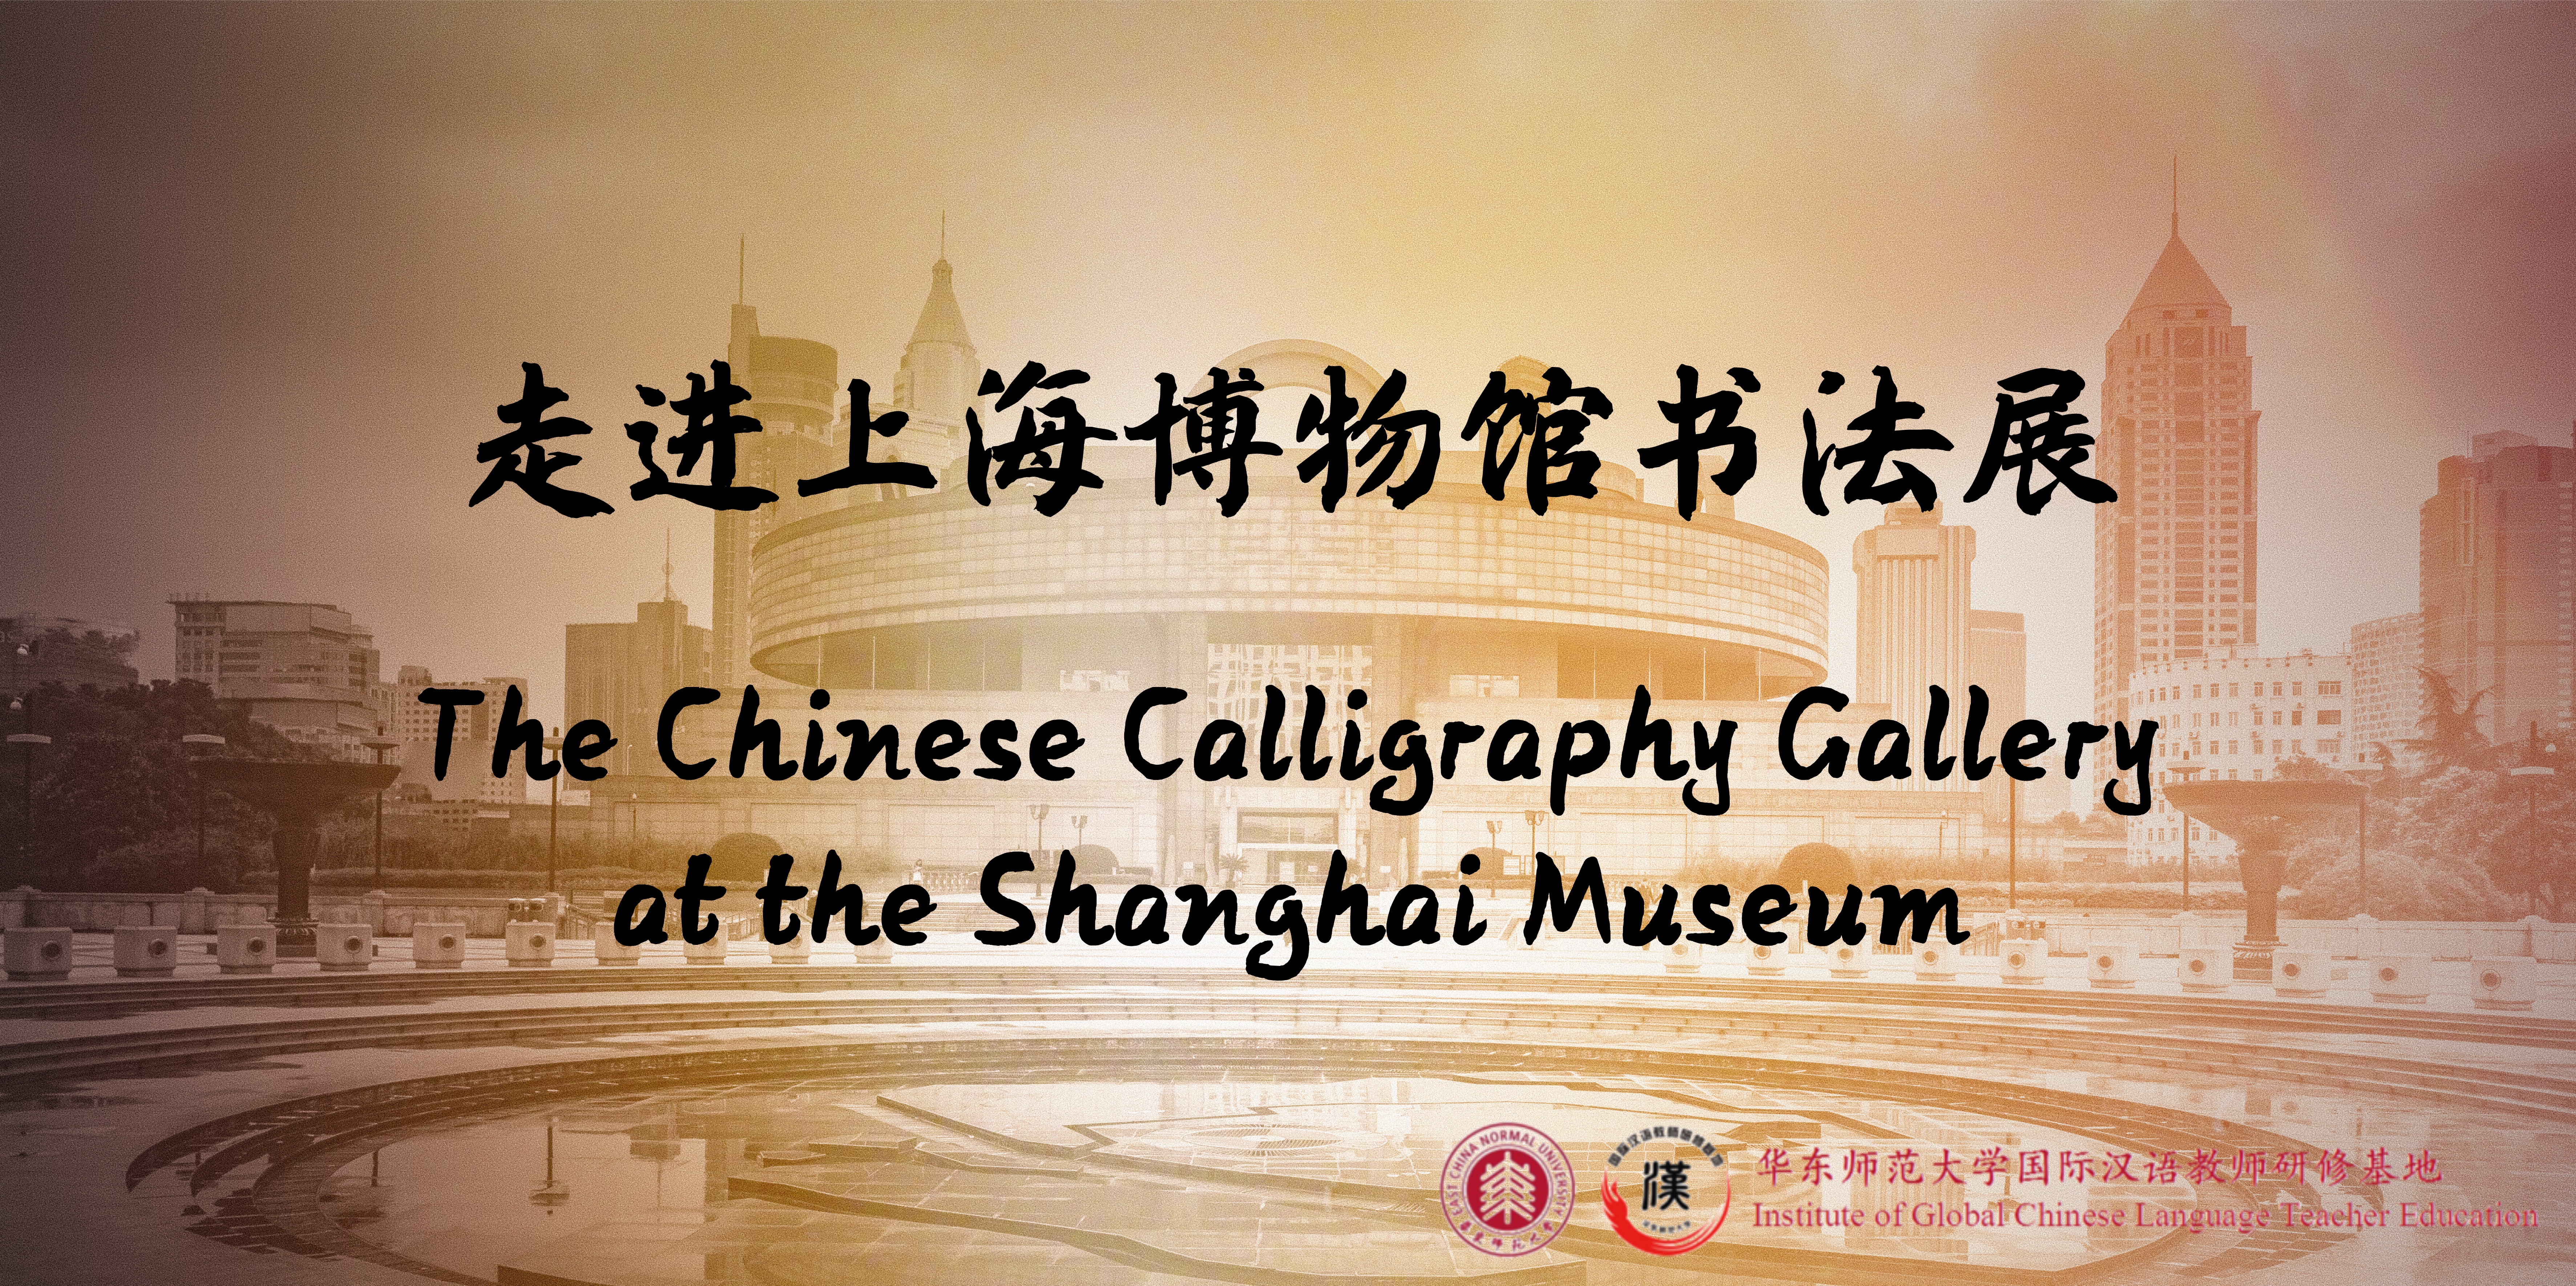 The Chinese Calligraphy Gallery at the Shanghai Museum